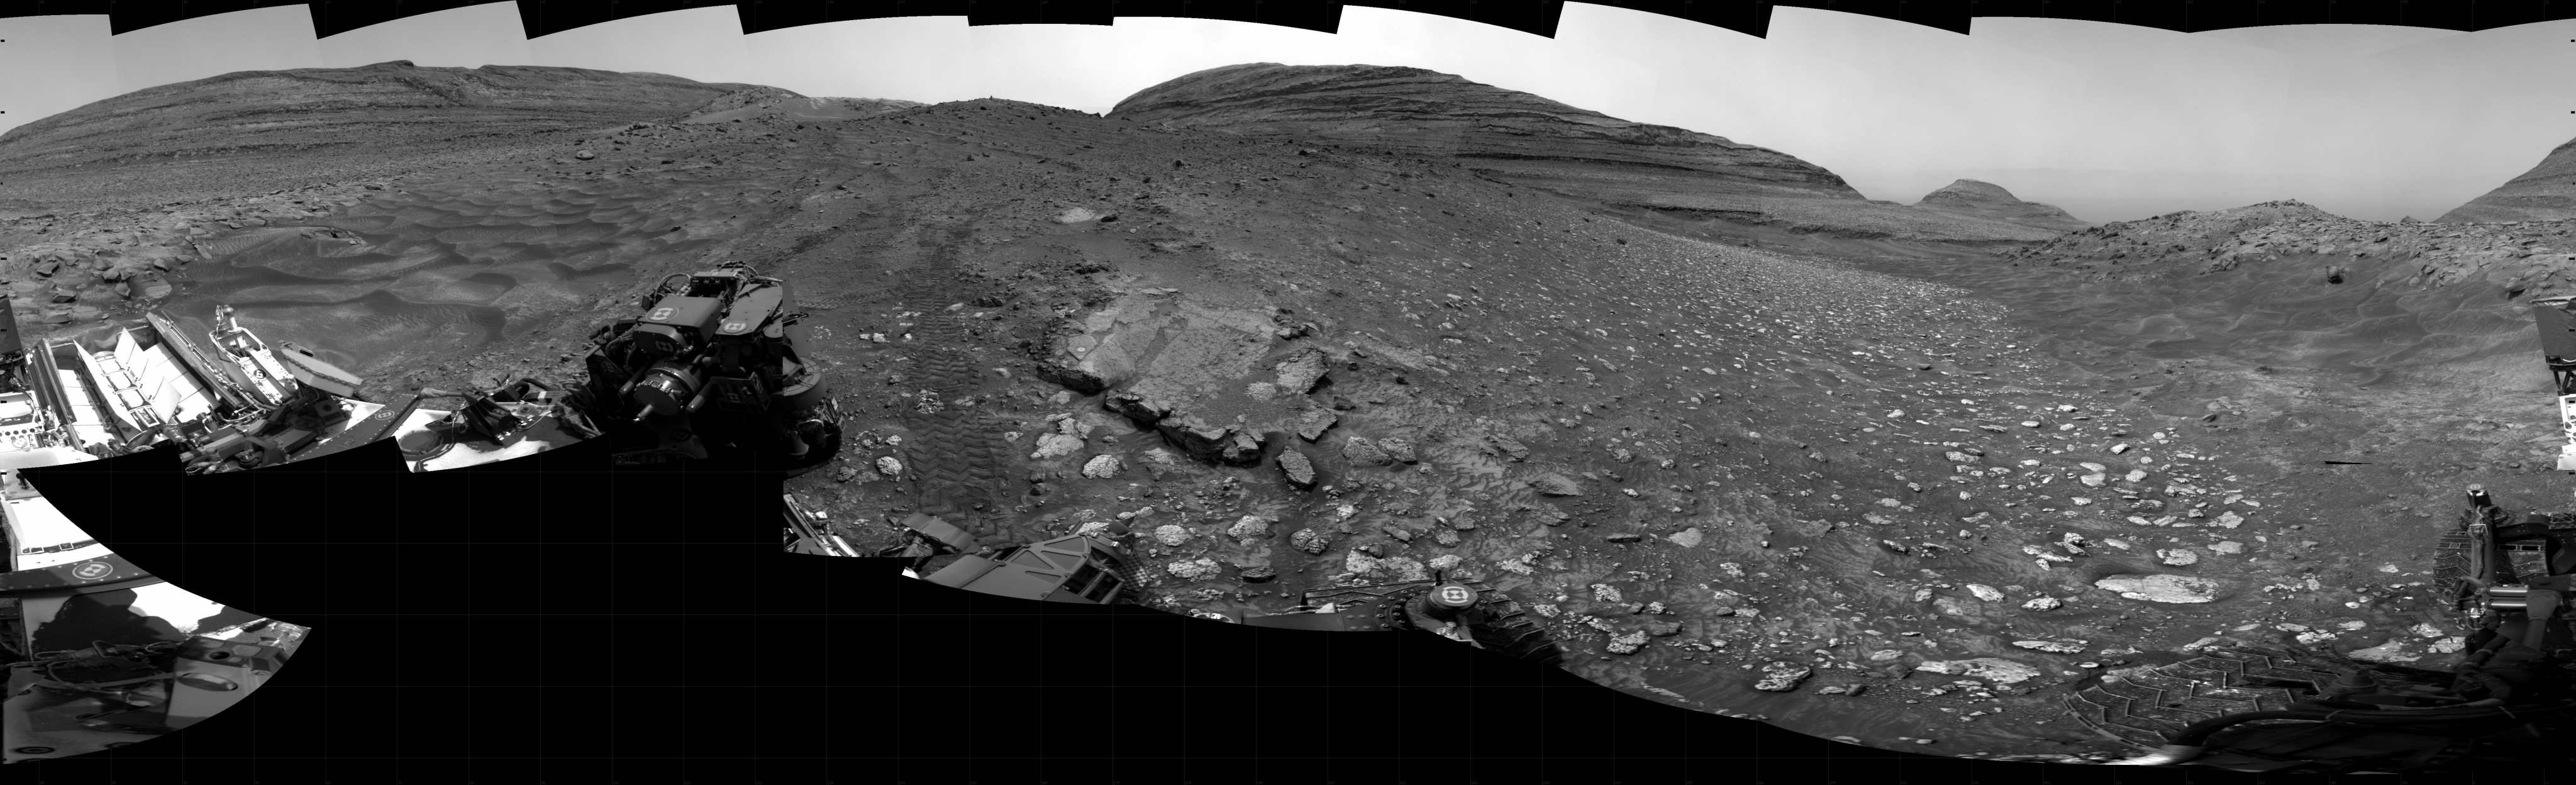 Curiosity took the images on June 05, 2024, Sols 4205-4200 of the Mars Science Laboratory mission at drive 2484, site number 107. The local mean solar time for the image exposures was from 1 PM to 2 PM.